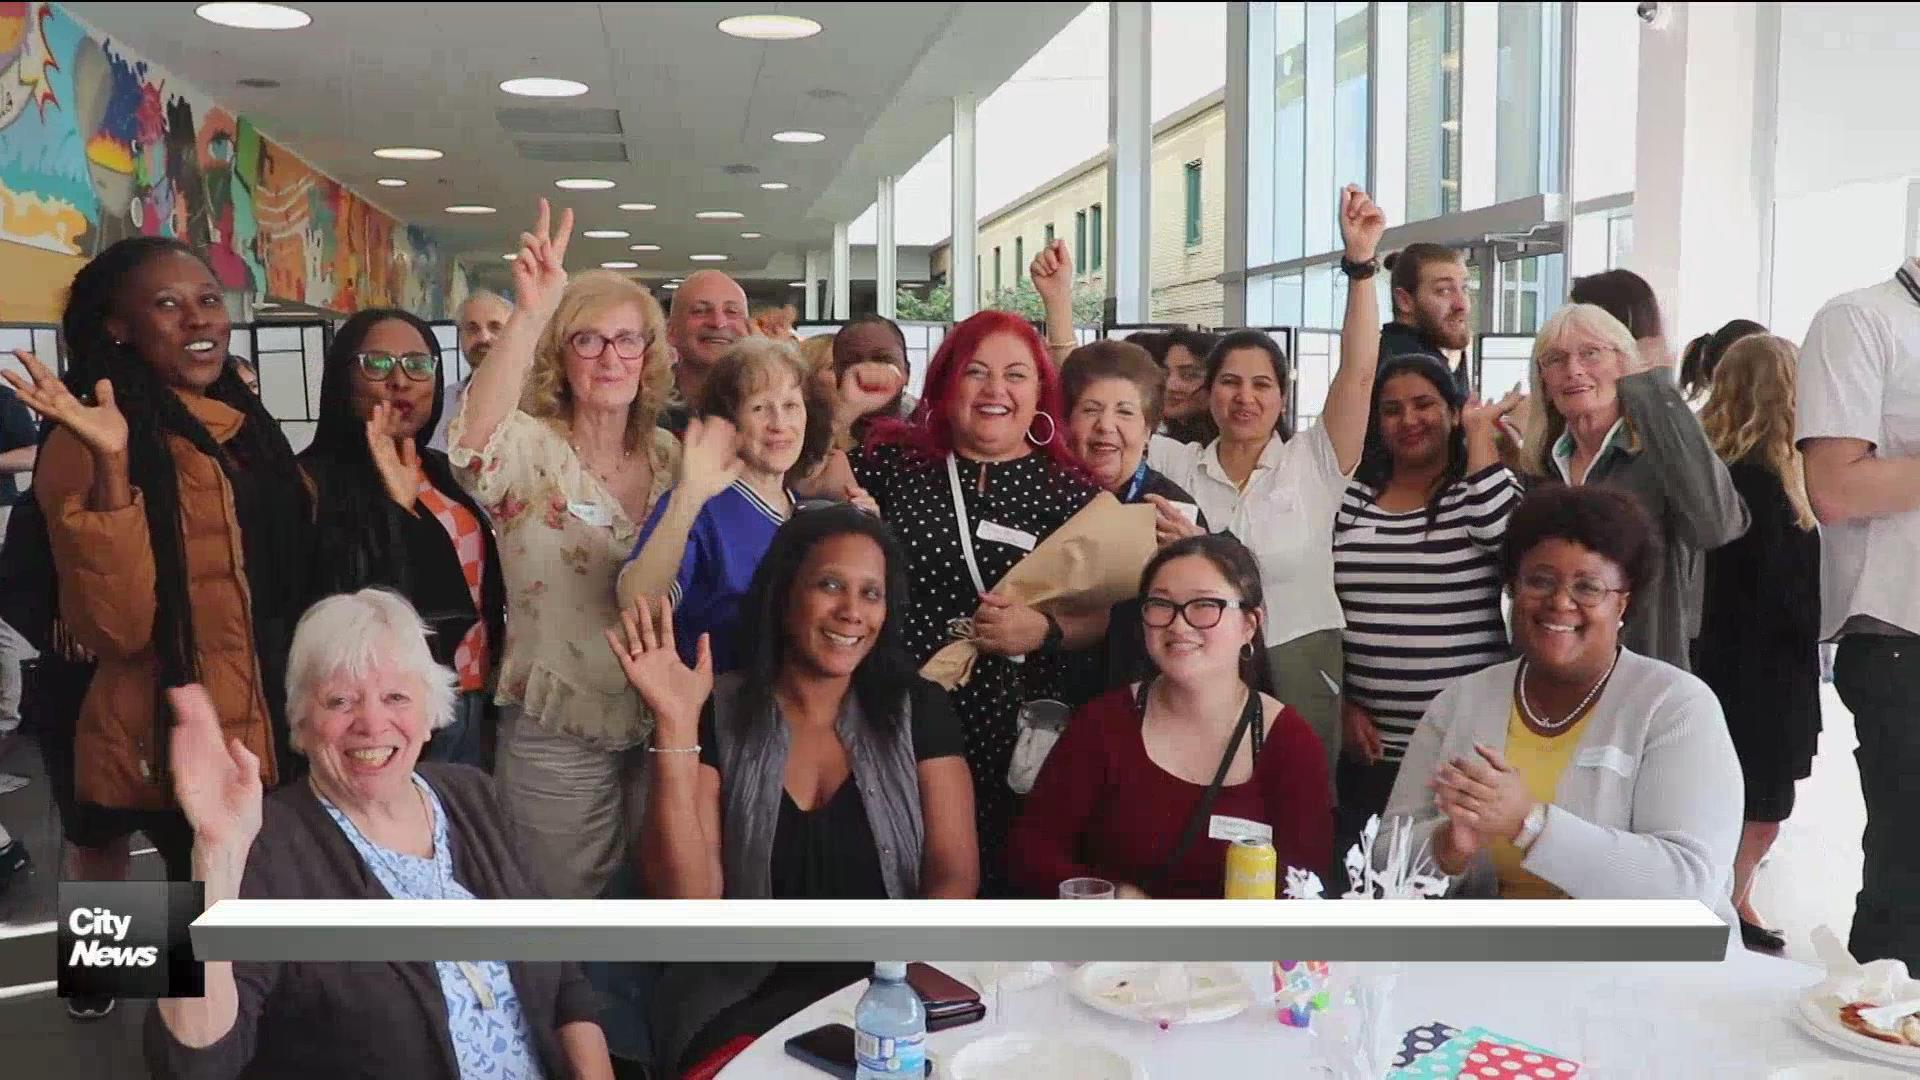 Montreal health care volunteers celebrated for their kindness